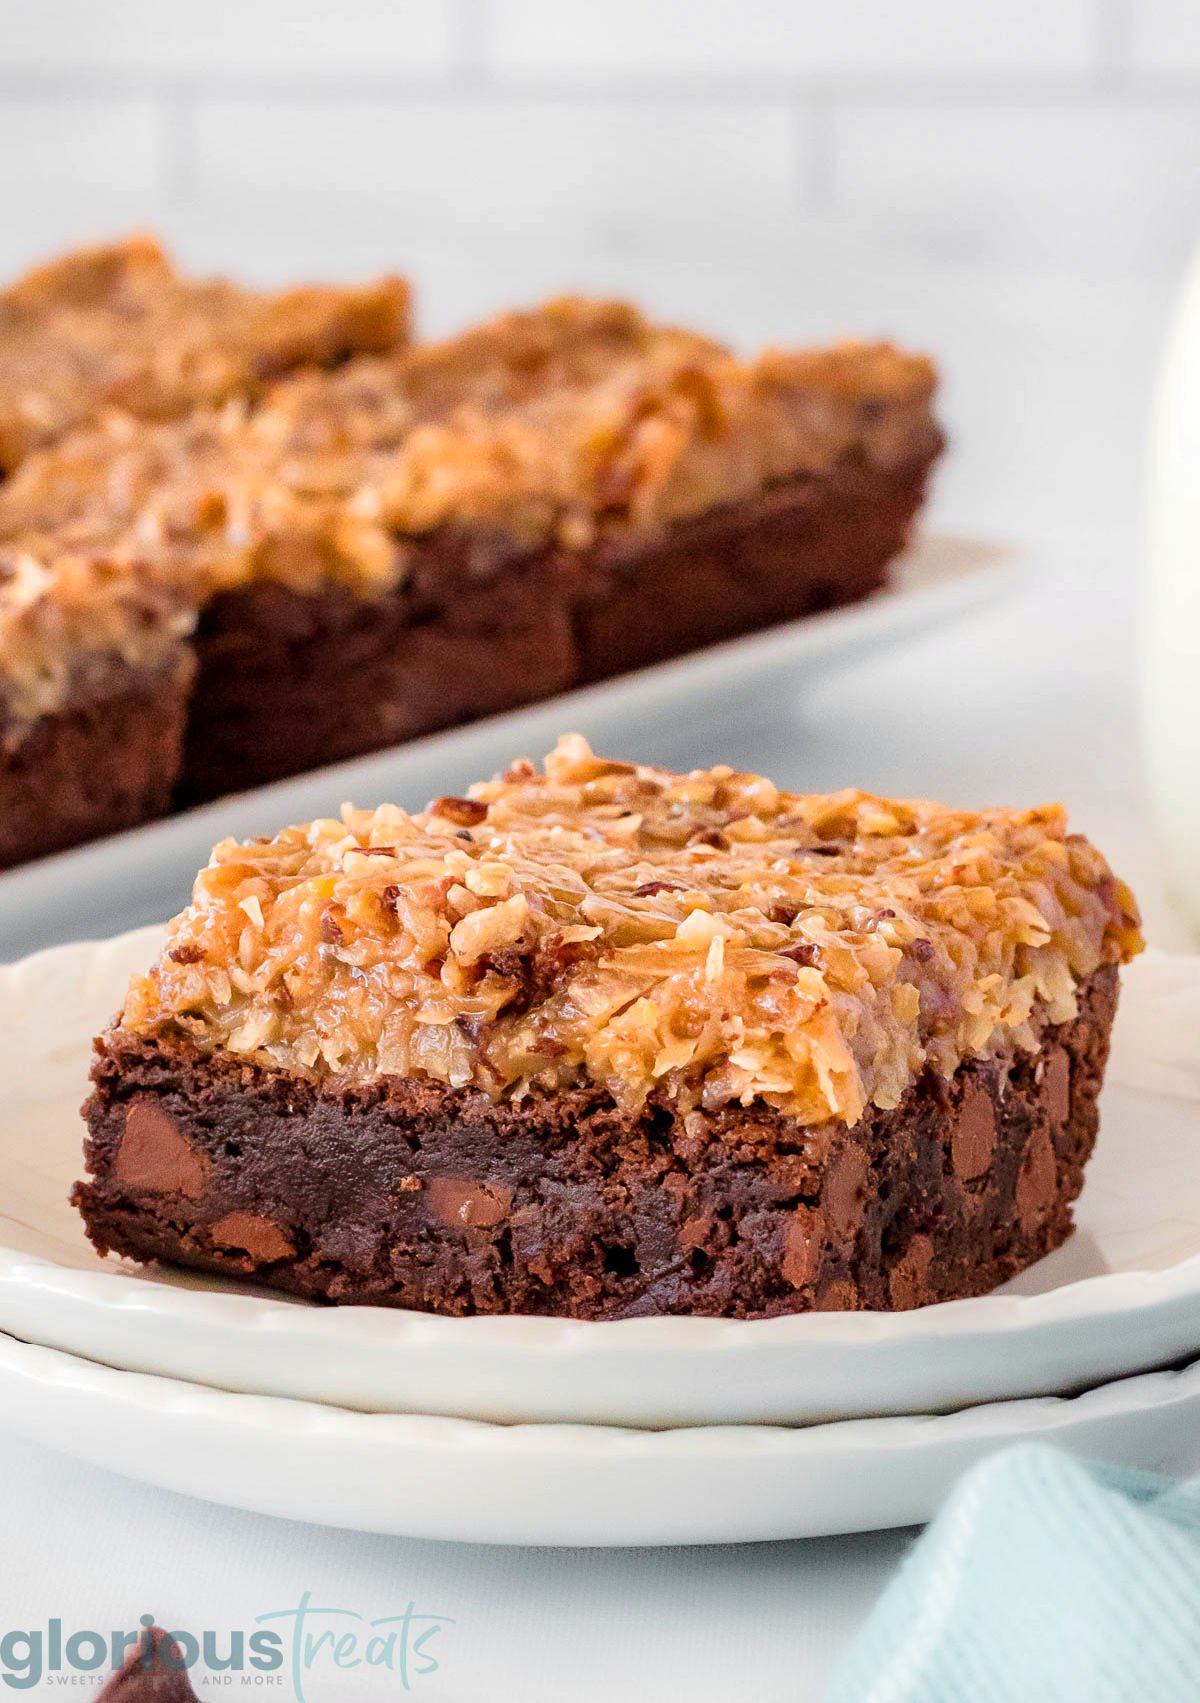 german chocolate brownie sitting on white round plate with more brownies seen in background. the brownies are topped with the classic coconut pecan frosting.